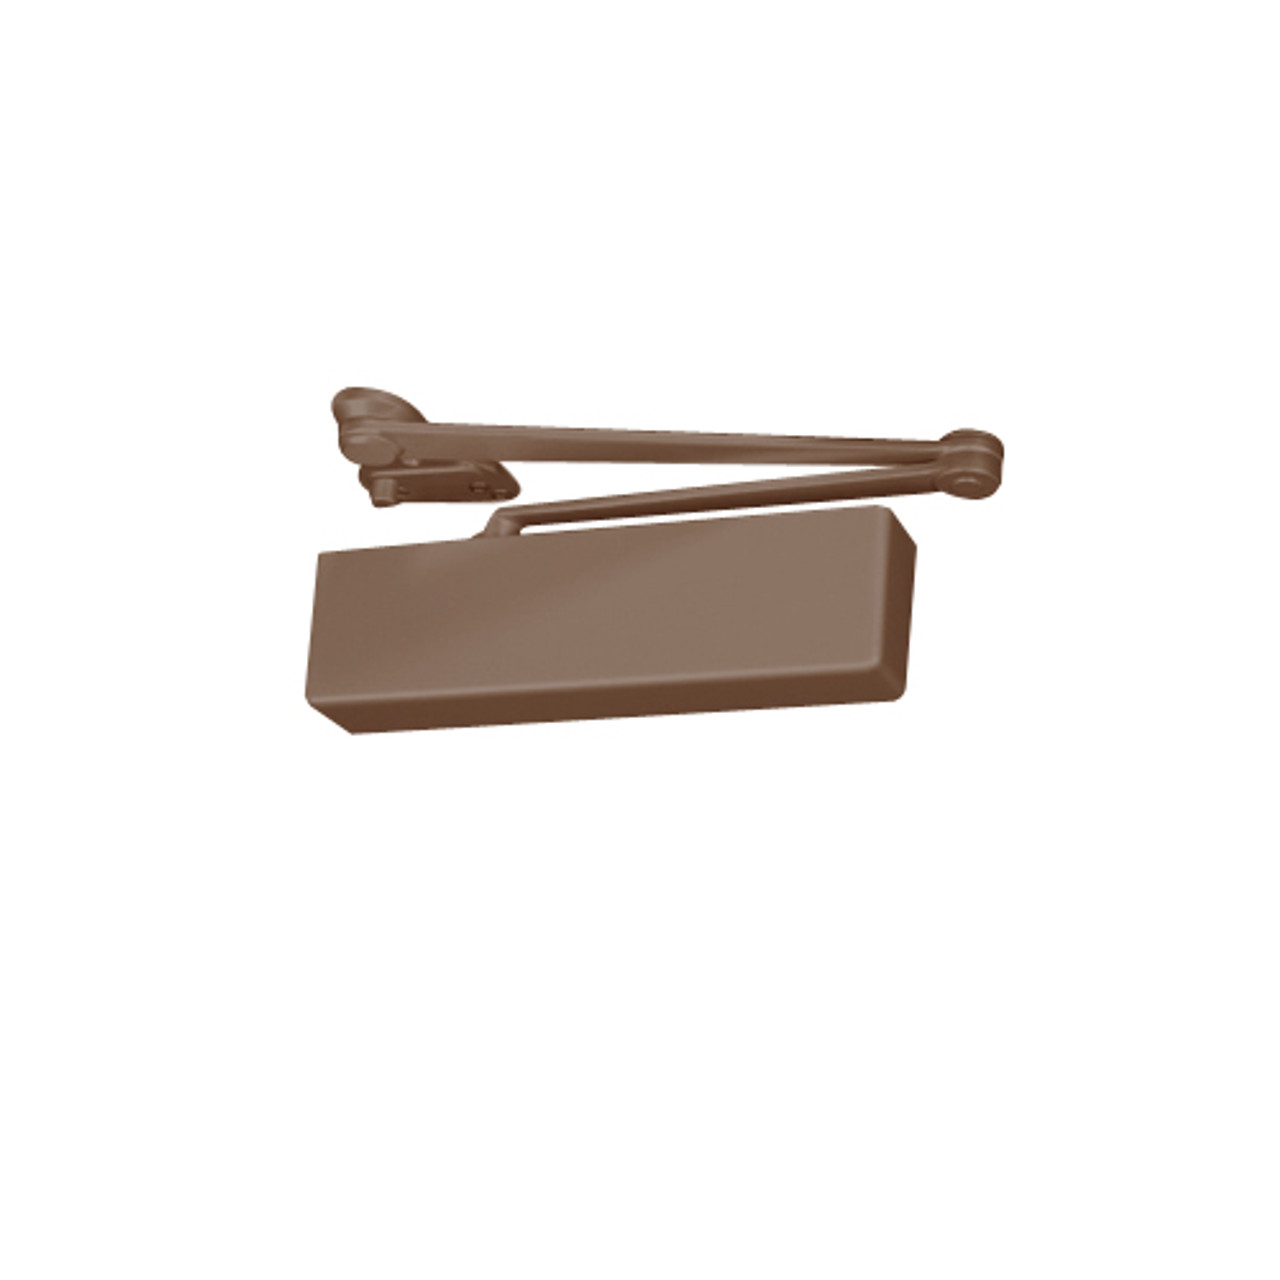 CLP7500-691 Norton 7500 Series Non-Hold Open Institutional Door Closer with CloserPlus Arm in Dull Bronze Finish